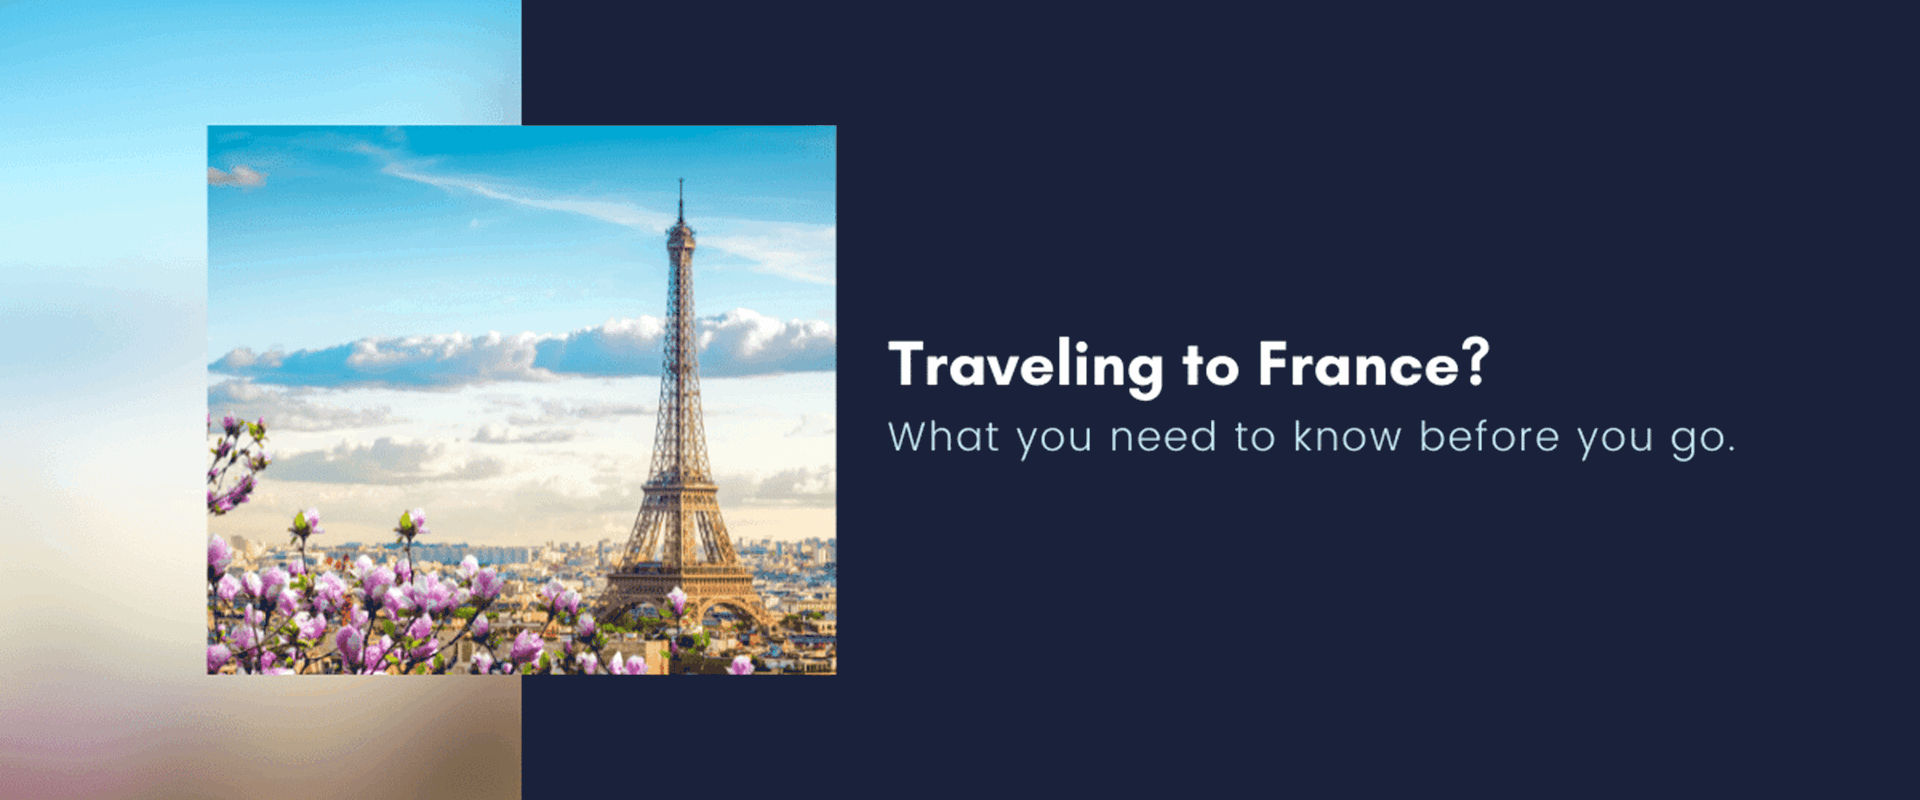 France Travel Requirements